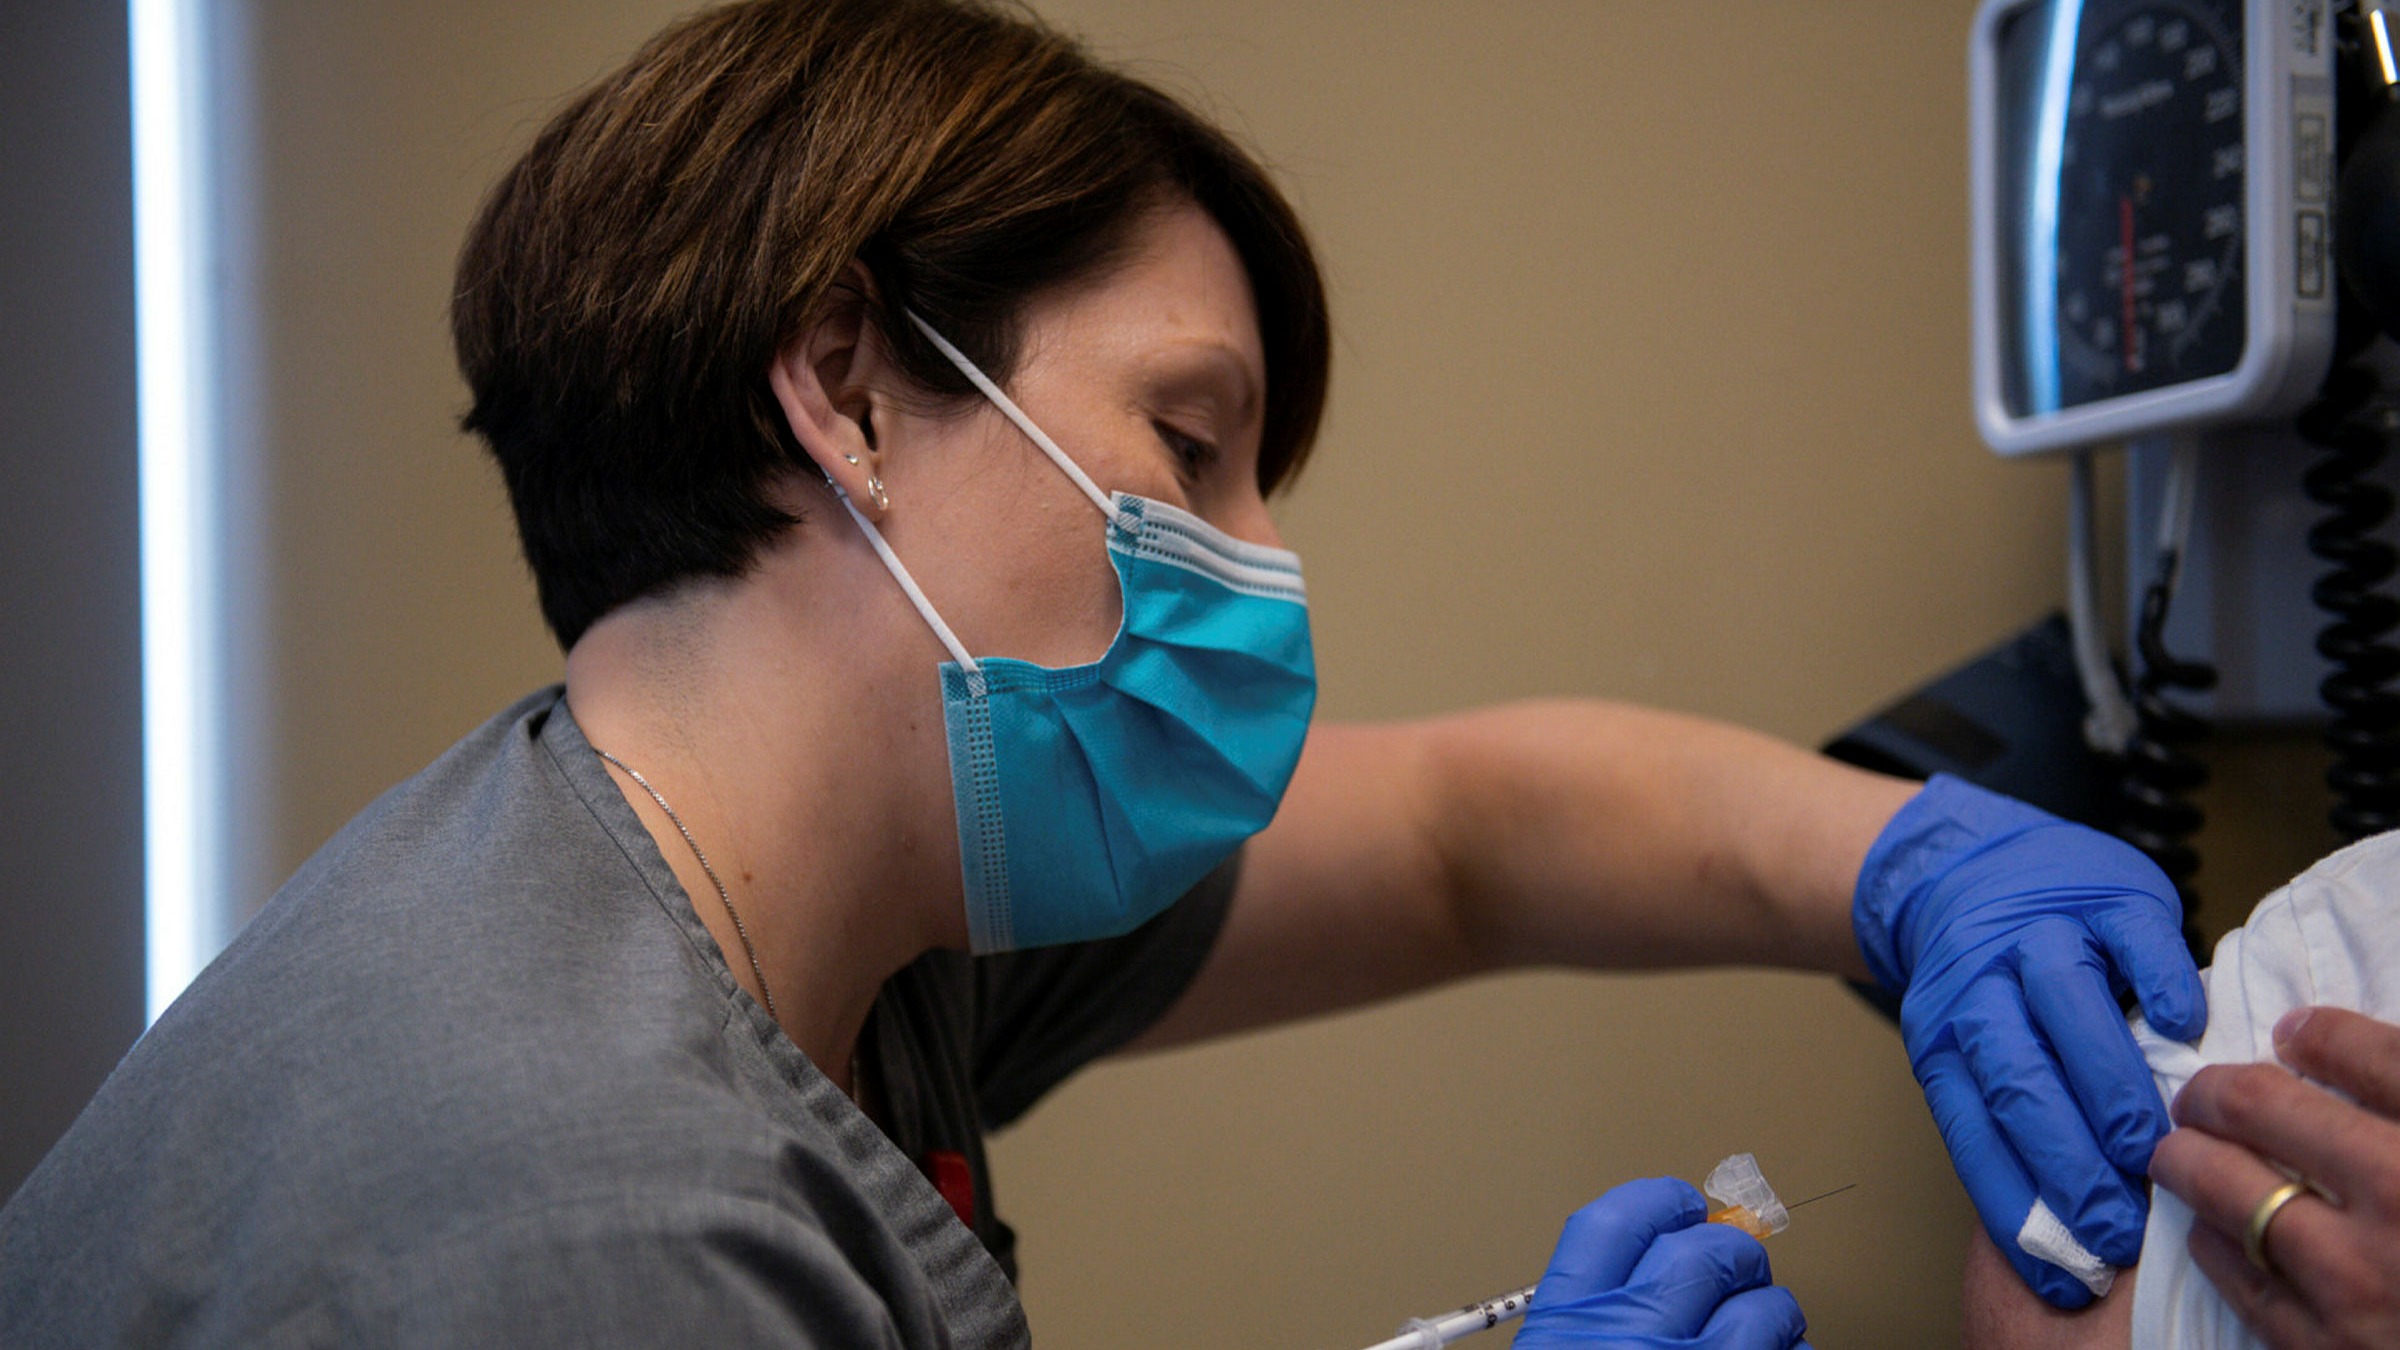 Latest news updates: 90% of US federal employees have been vaccinated ahead of mandate deadline